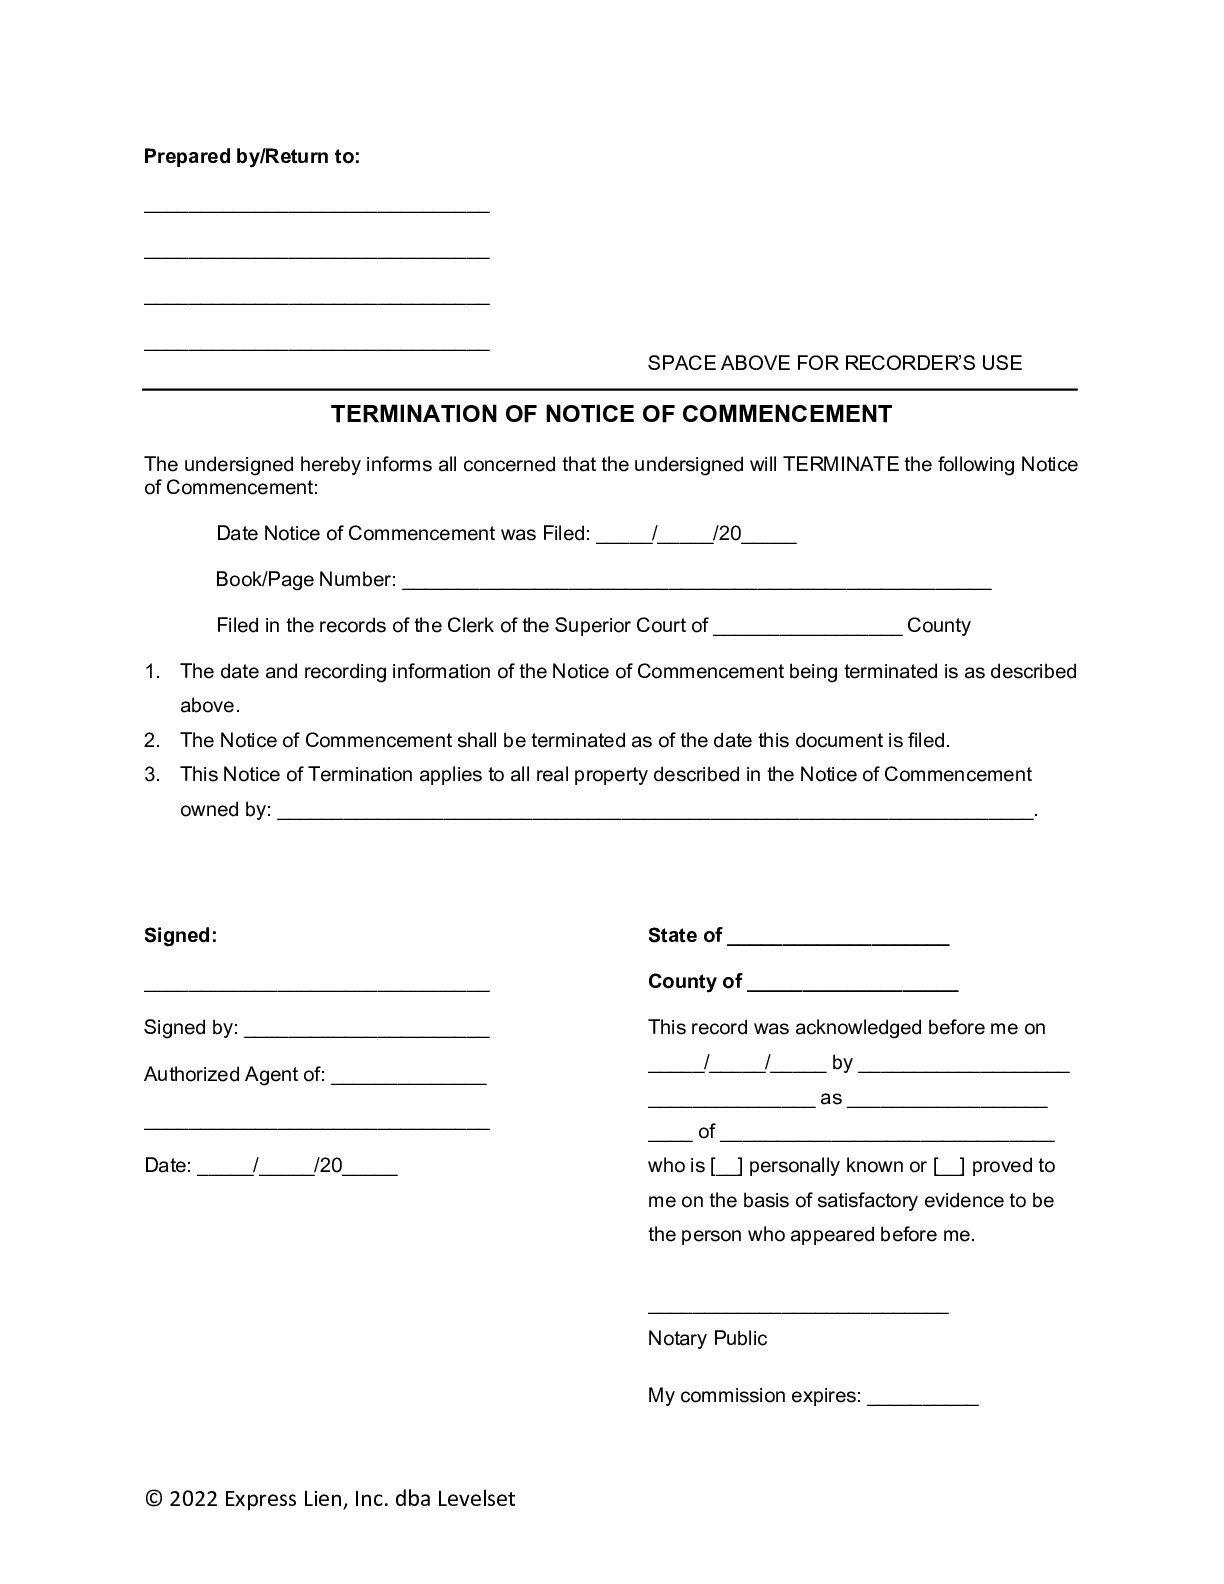 Georgia Termination of Notice of Commencement Form | Free Template - free from